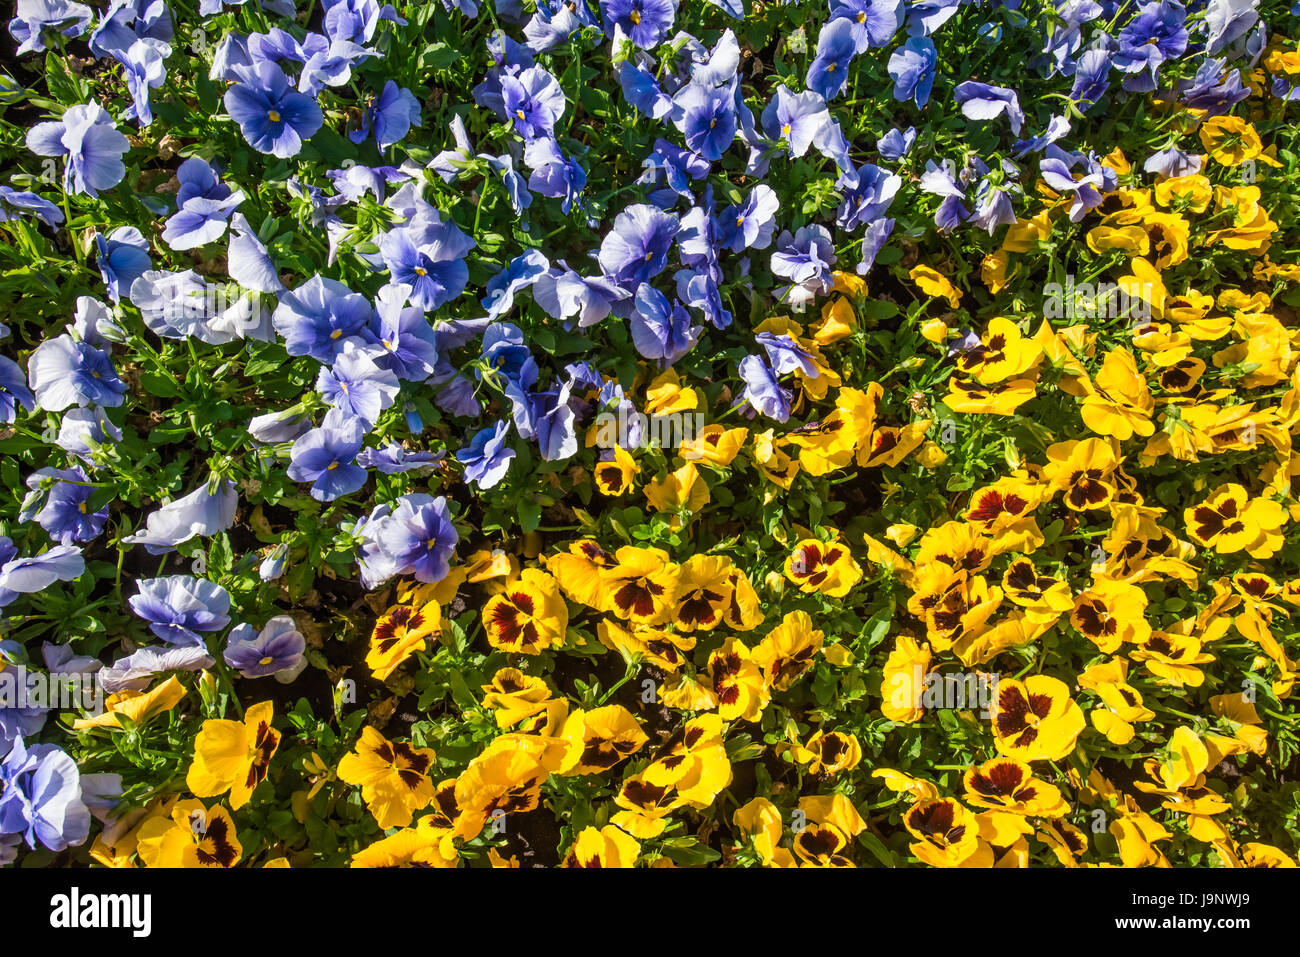 Top view of diagonal colourful flowerbed made of blue and yellow pansies in sunshine Stock Photo